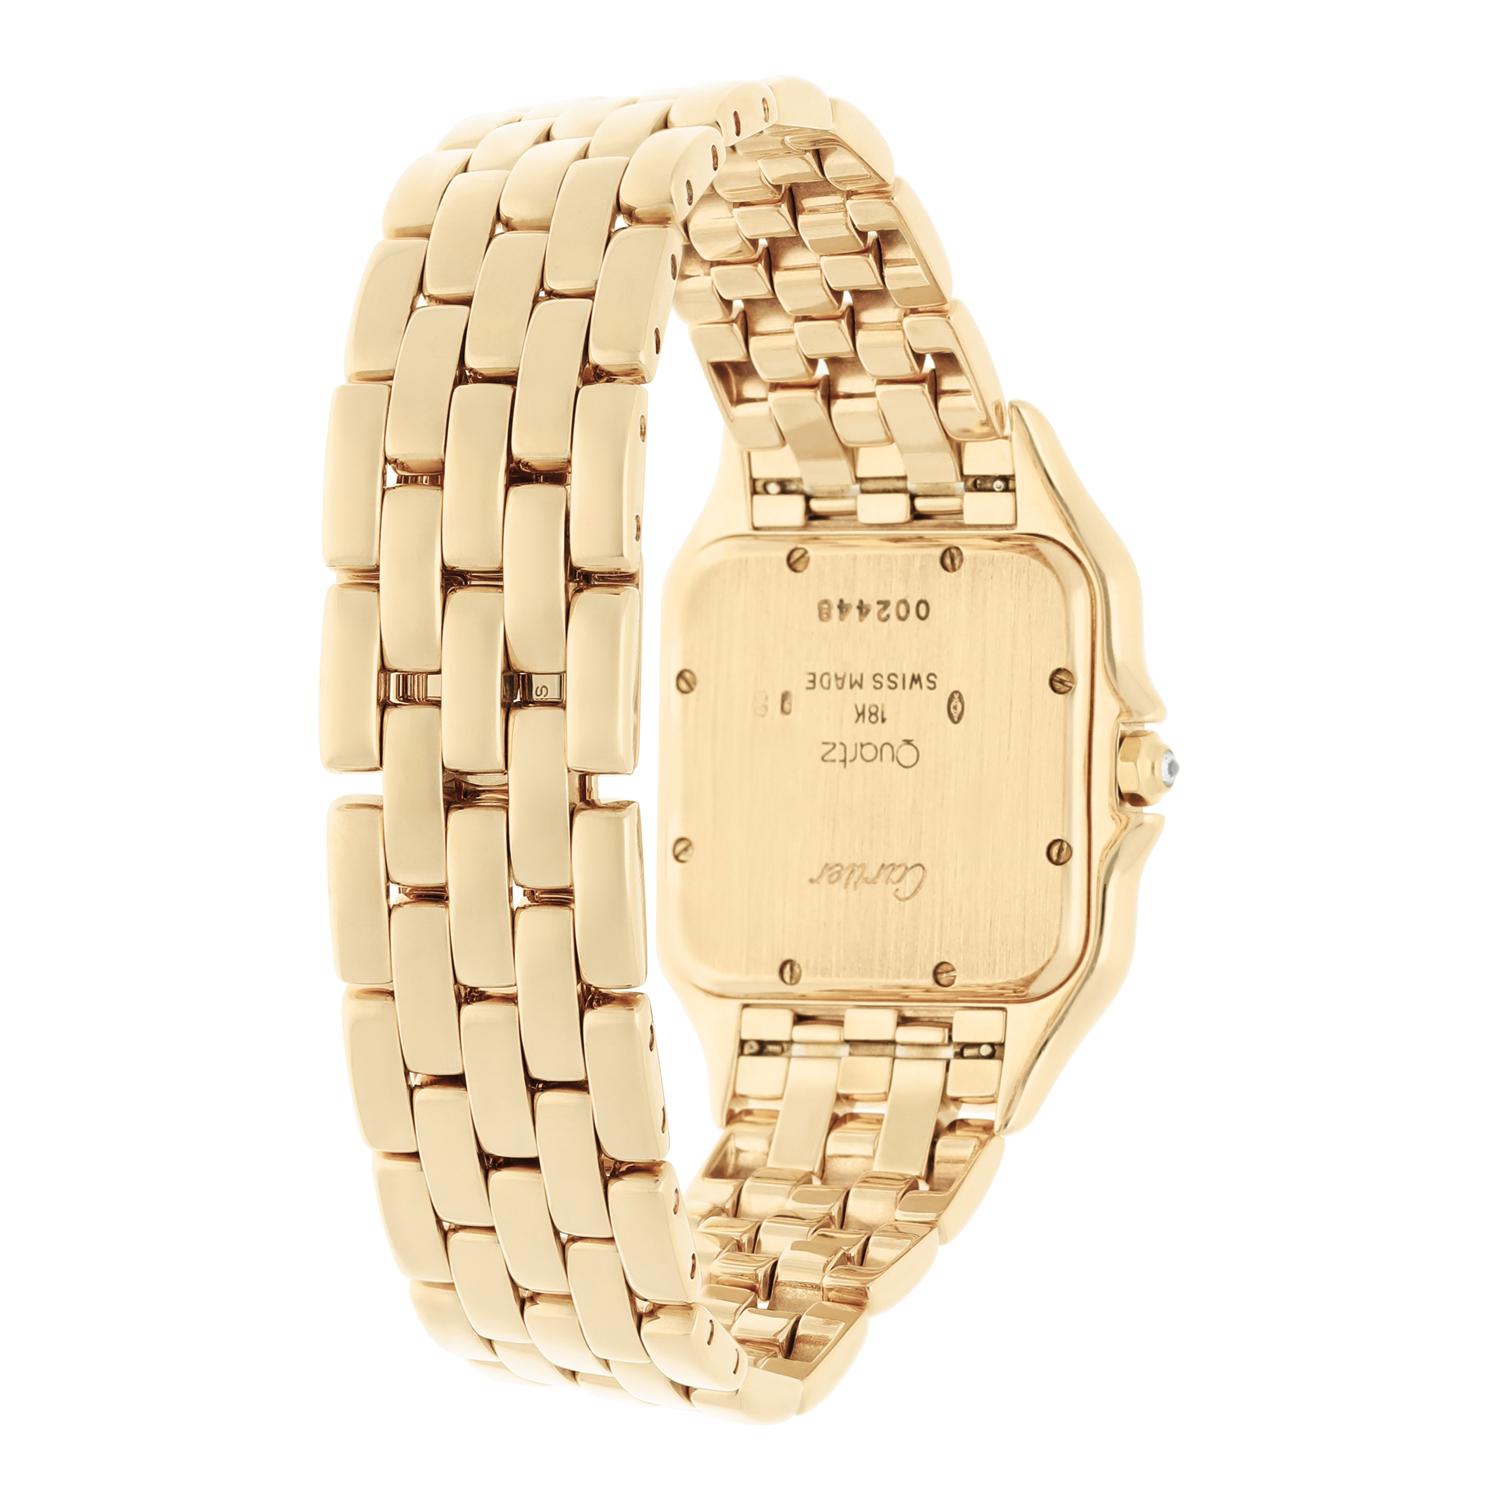 Cartier Panthere 29mm Ladies Large 18K Yellow Gold Watch with Diamonds 887968 For Sale 2